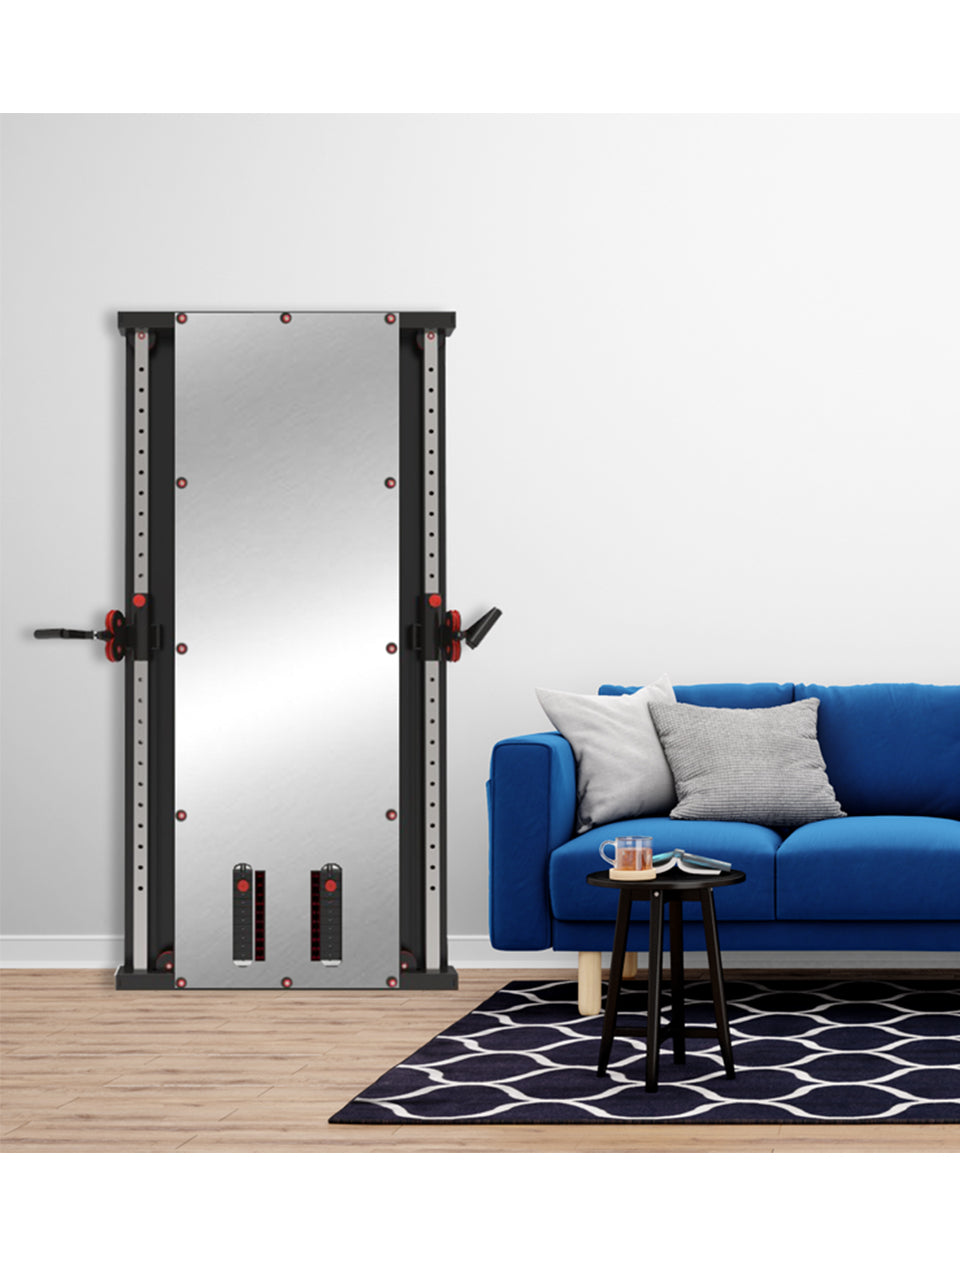 1441 Fitness Wall Mounted Mirror Functional Trainer - 41FGT980